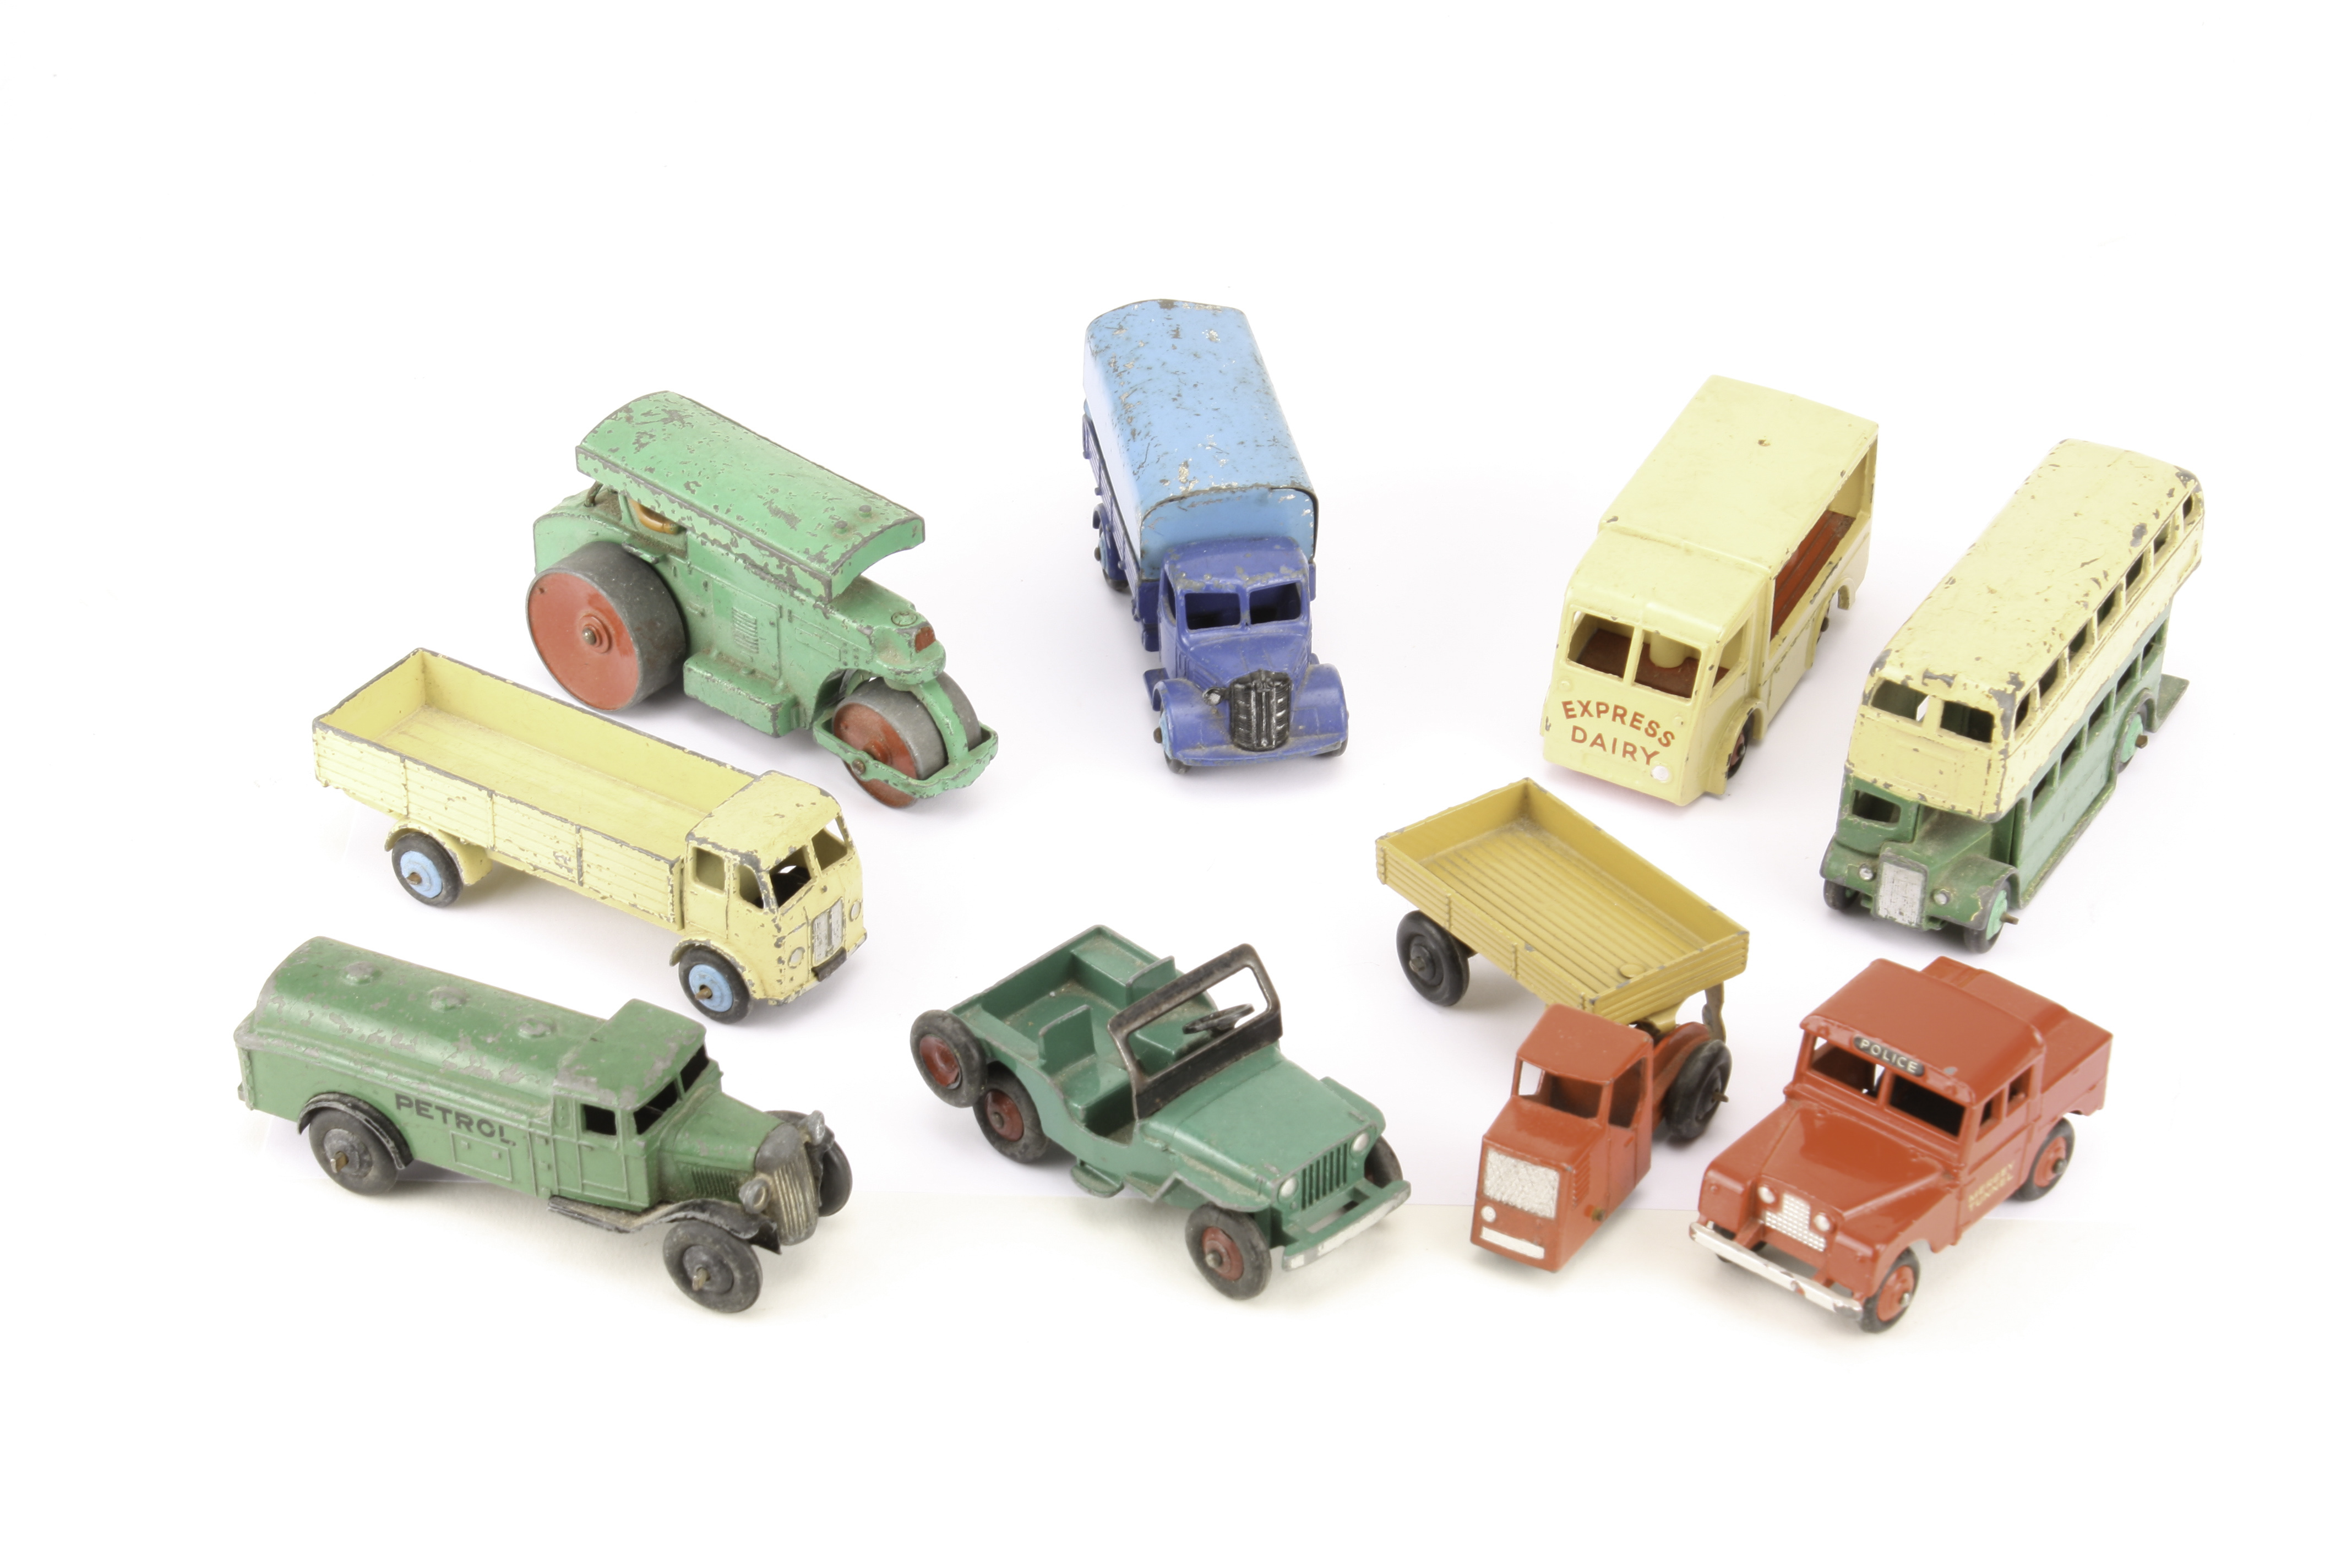 Dinky Toys Small Commercials: including 255 Mersey Tunnel Police Land Rover, 30V Express Dairy Van